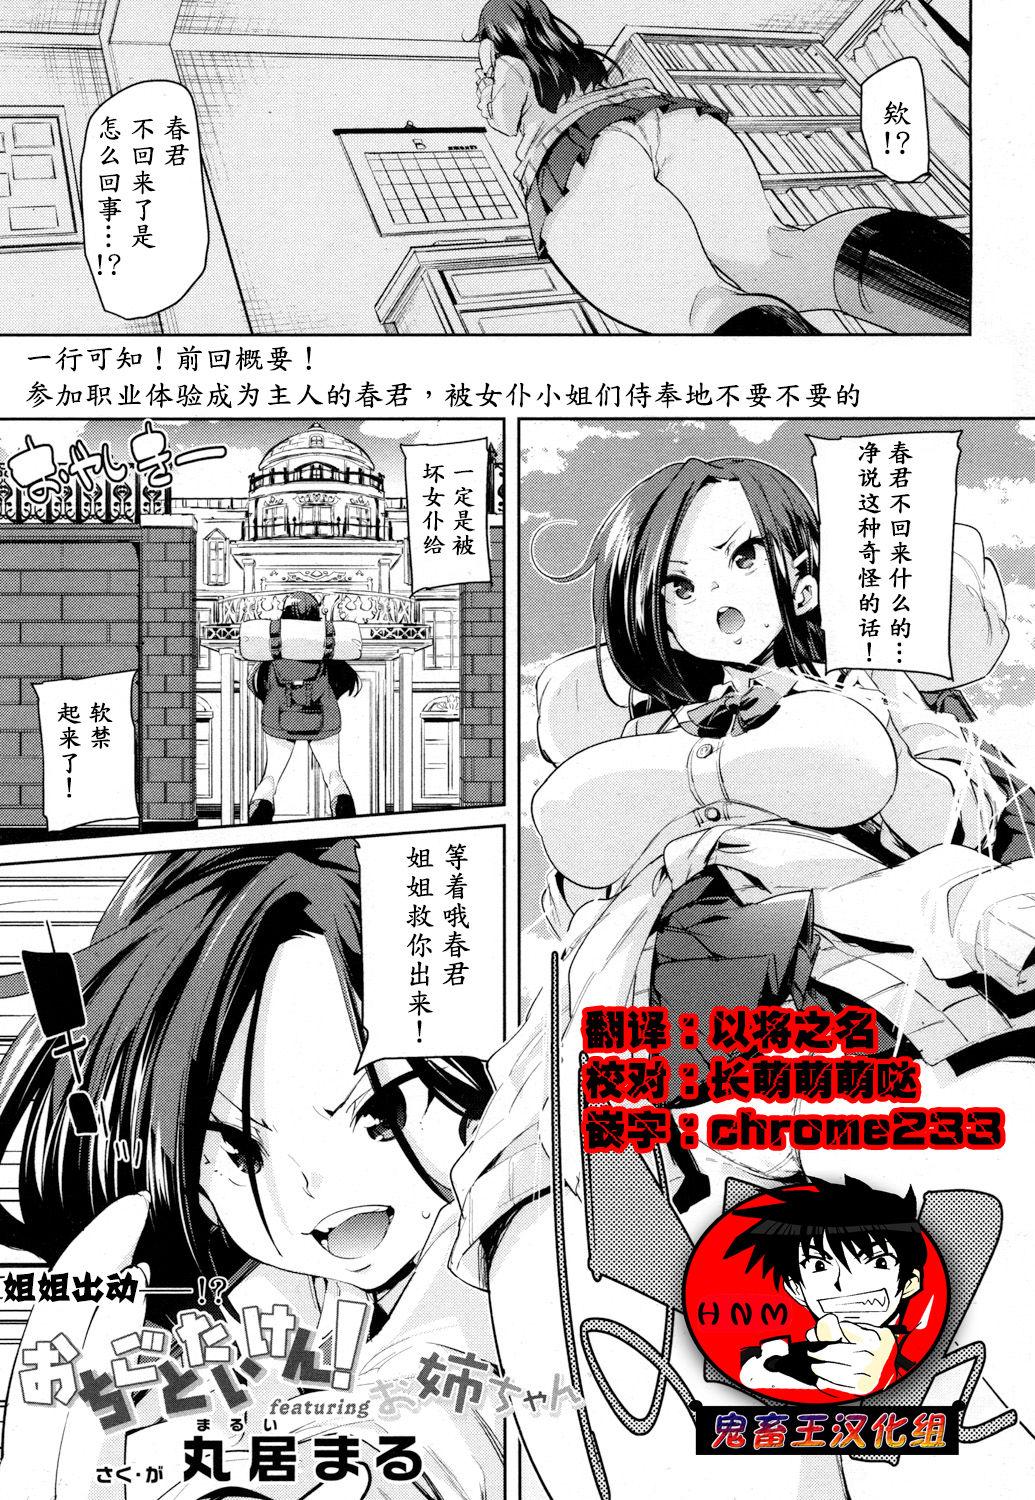 Small Tits Ochigo to Taiken! featuring Onee-chan Cock Suckers - Page 1